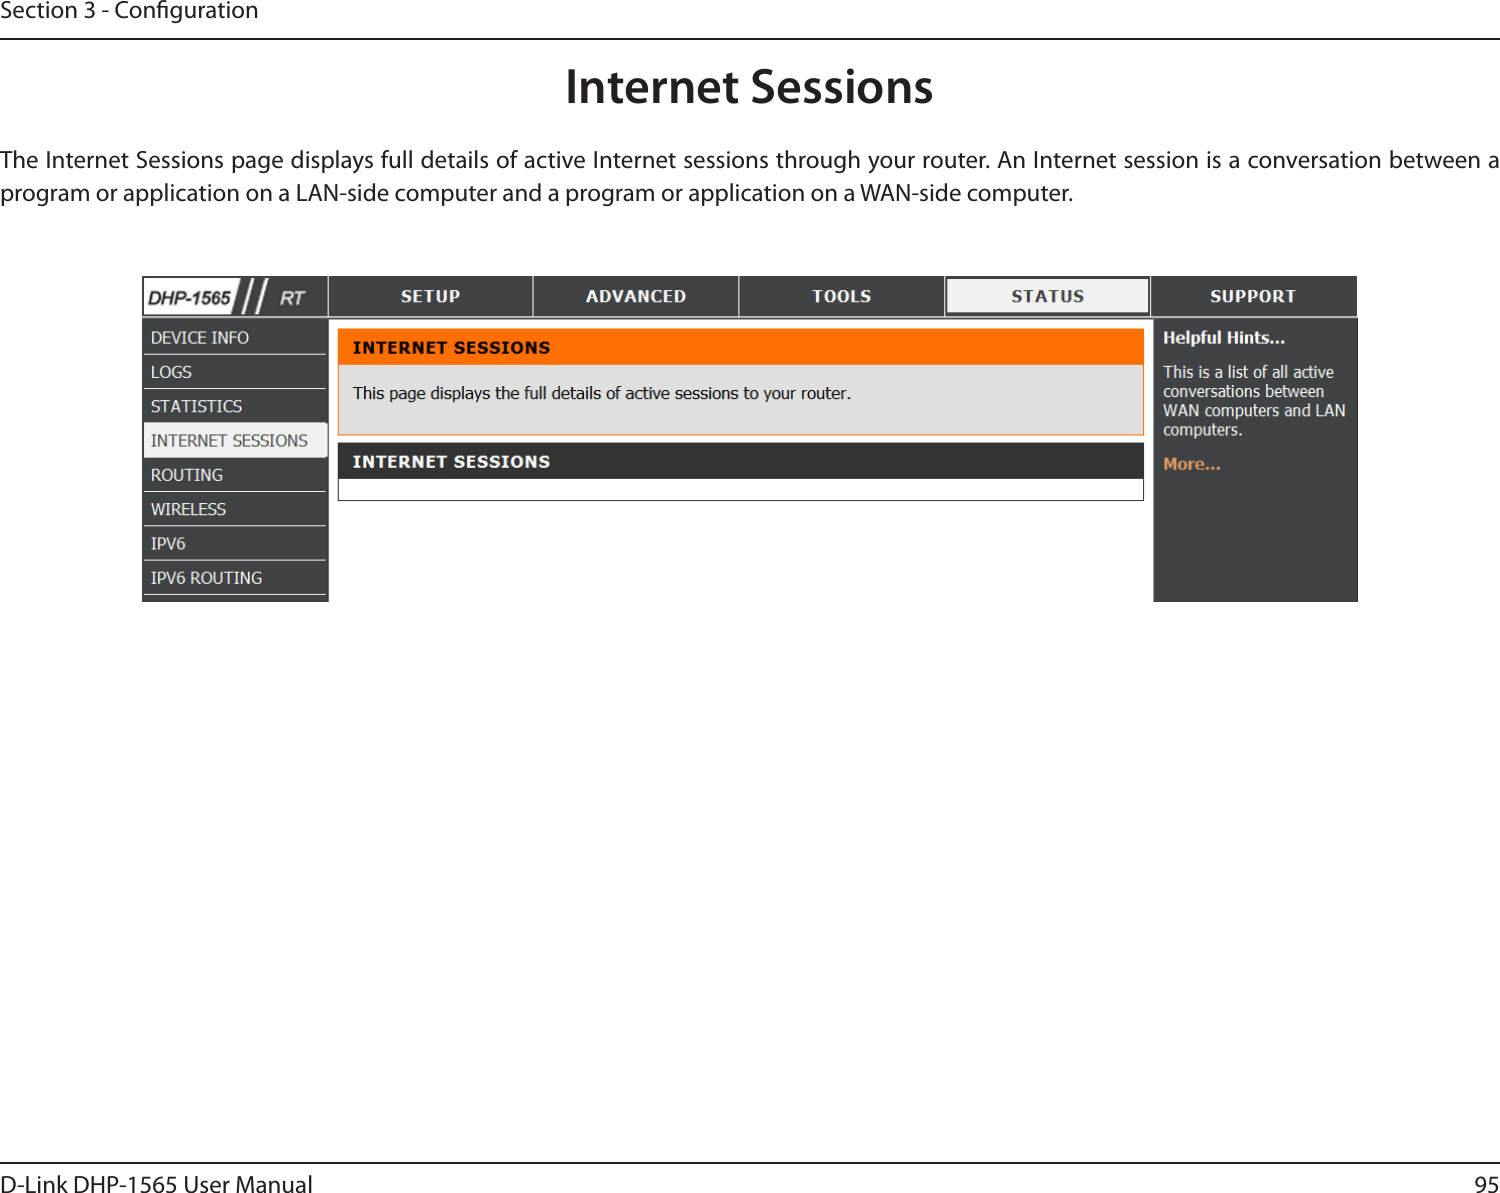 95D-Link DHP-1565 User ManualSection 3 - CongurationInternet SessionsThe Internet Sessions page displays full details of active Internet sessions through your router. An Internet session is a conversation between a program or application on a LAN-side computer and a program or application on a WAN-side computer. 